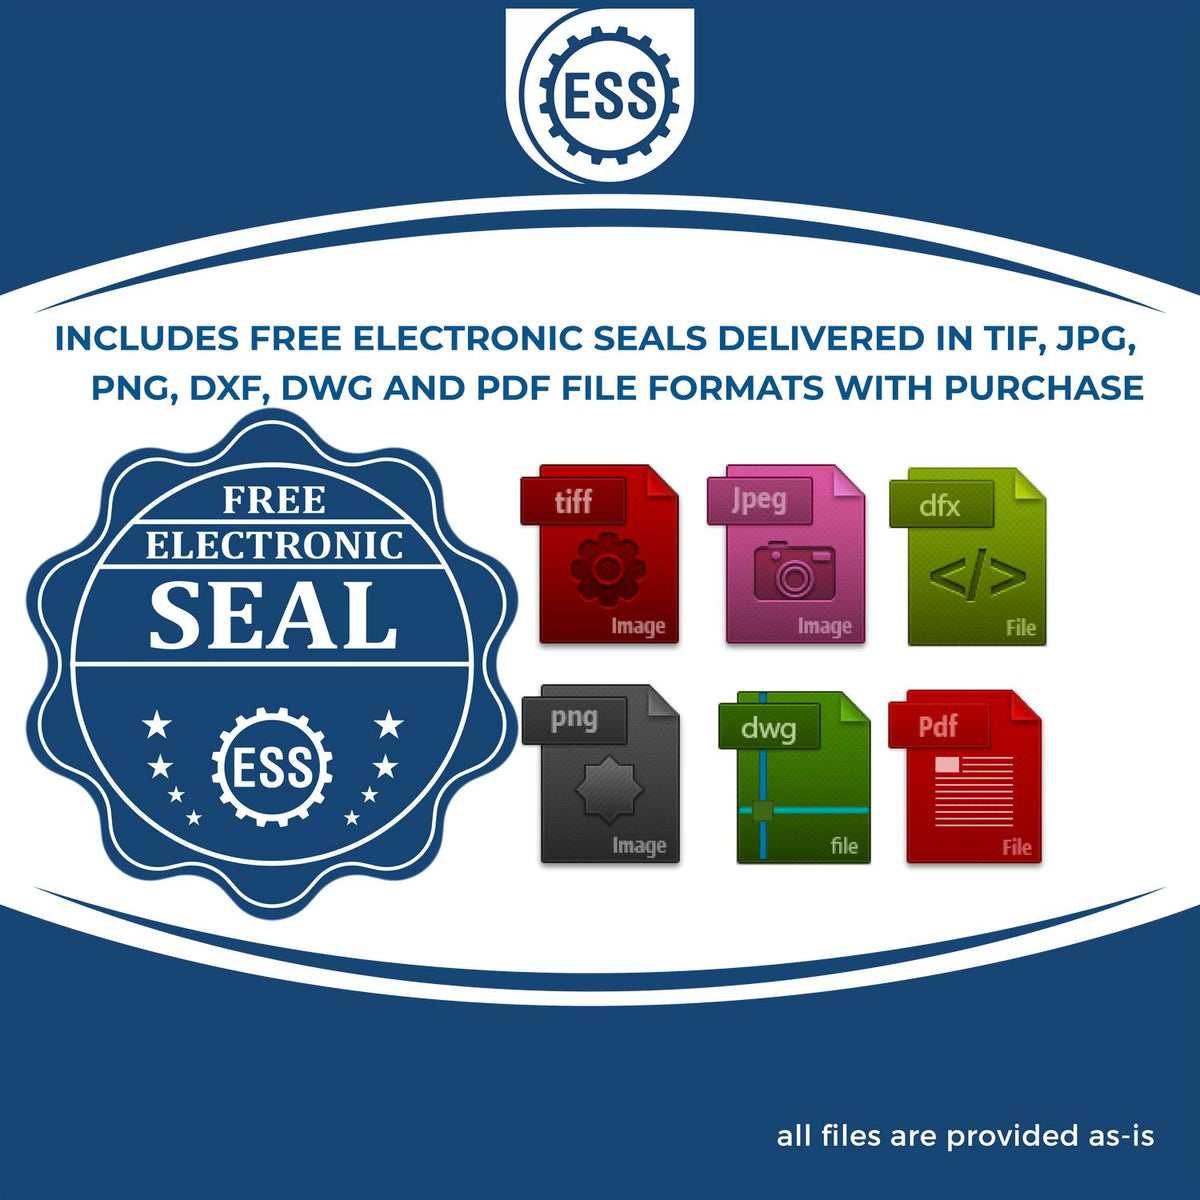 An infographic for the free electronic seal for the Self-Inking Hawaii Geologist Stamp illustrating the different file type icons such as DXF, DWG, TIF, JPG and PNG.